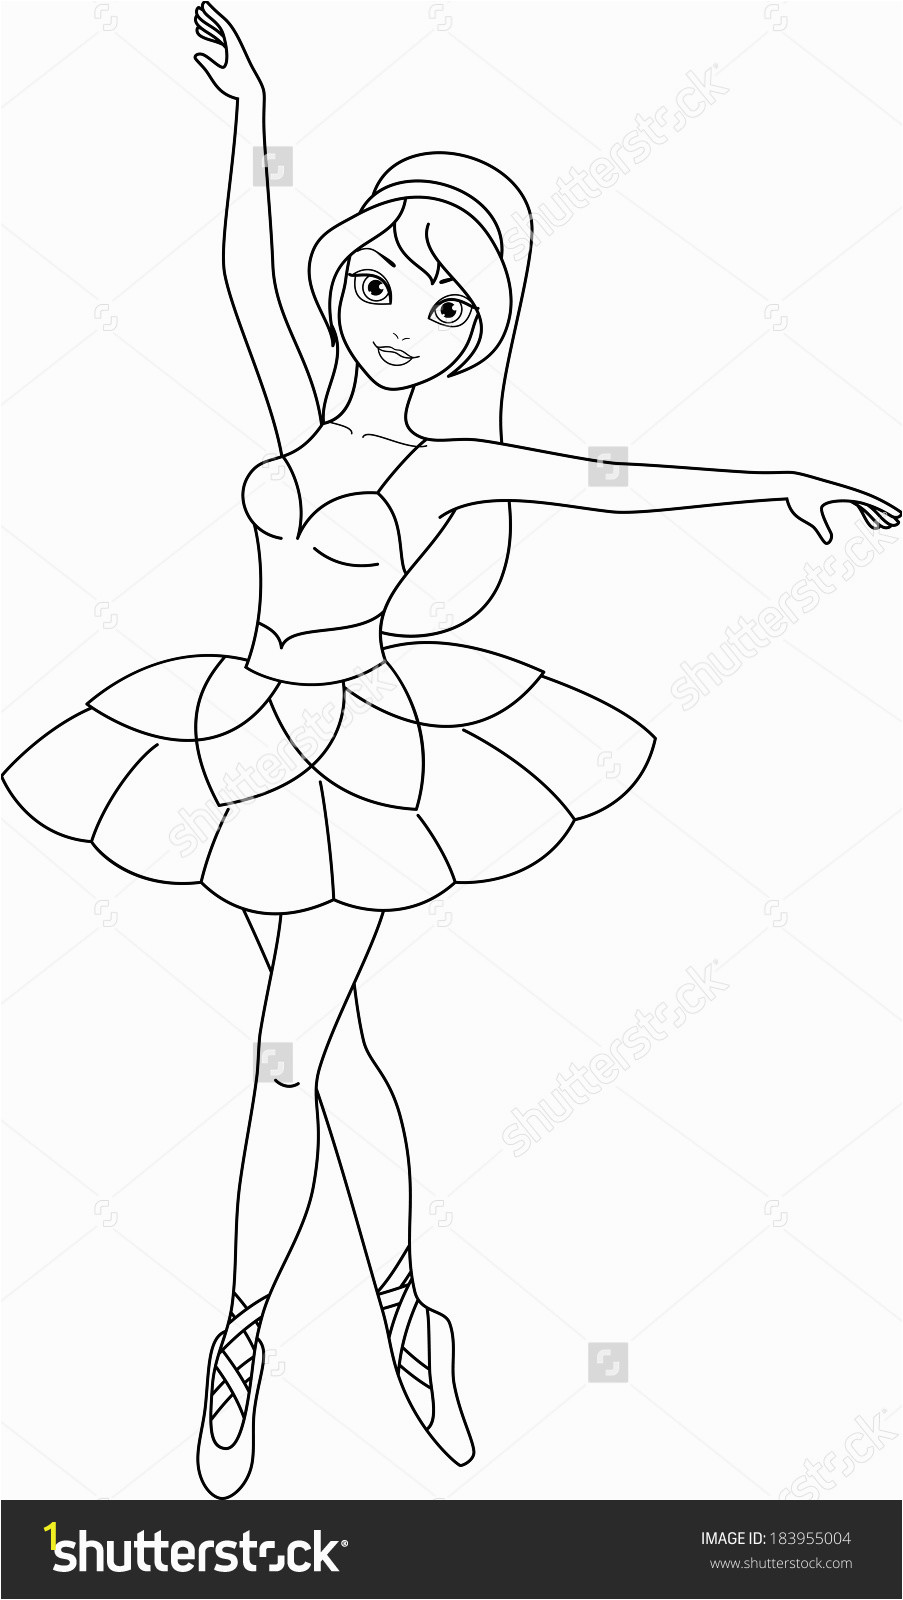 ballerina coloring book image ideas pages for adults angelina kids printableimmer and